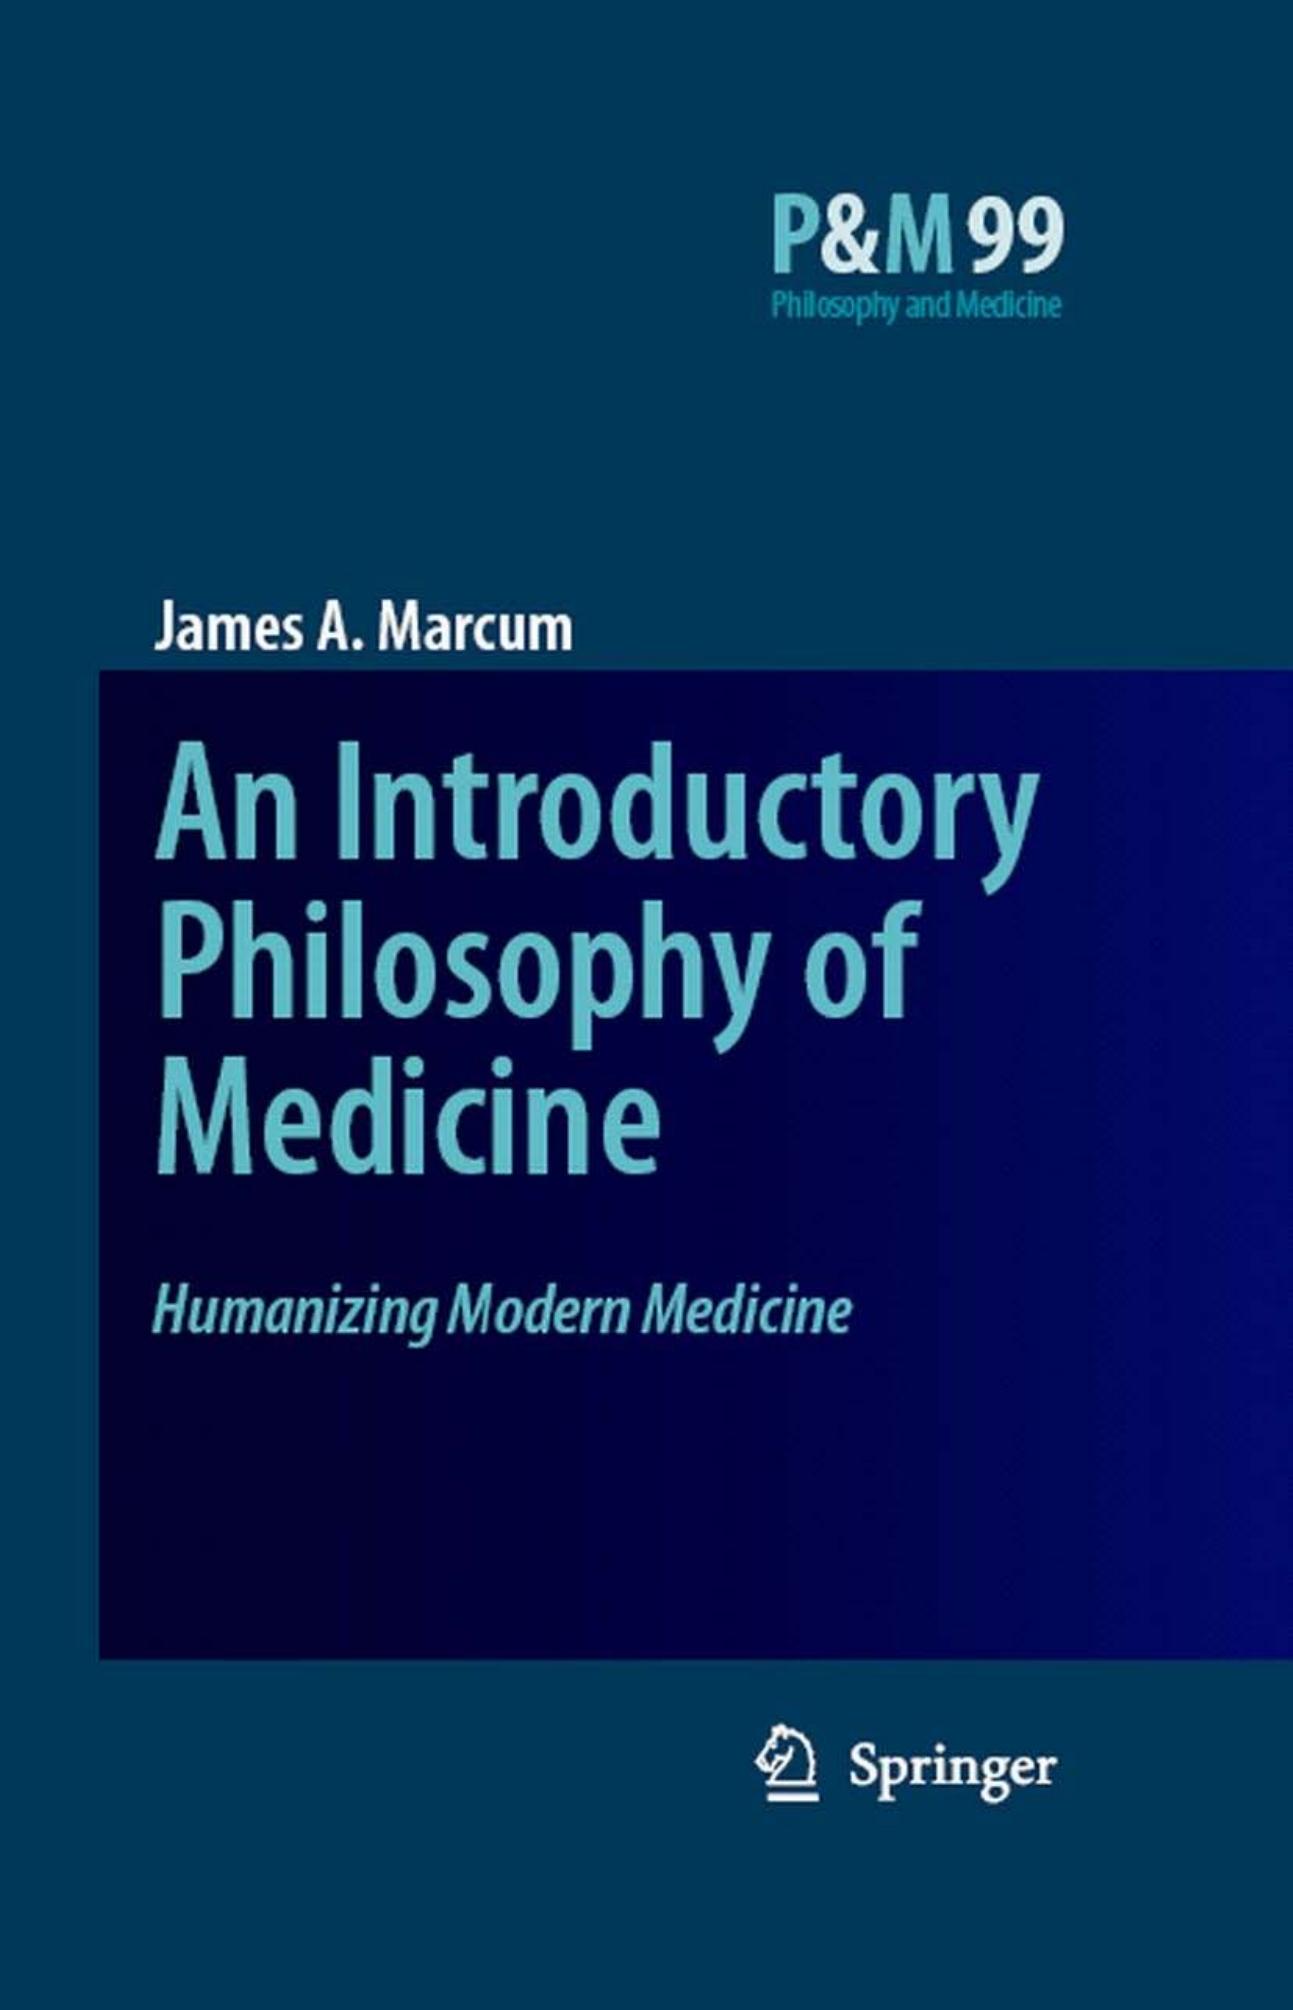 An Introductory Philosophy of Medicine: Humanizing Modern Medicine